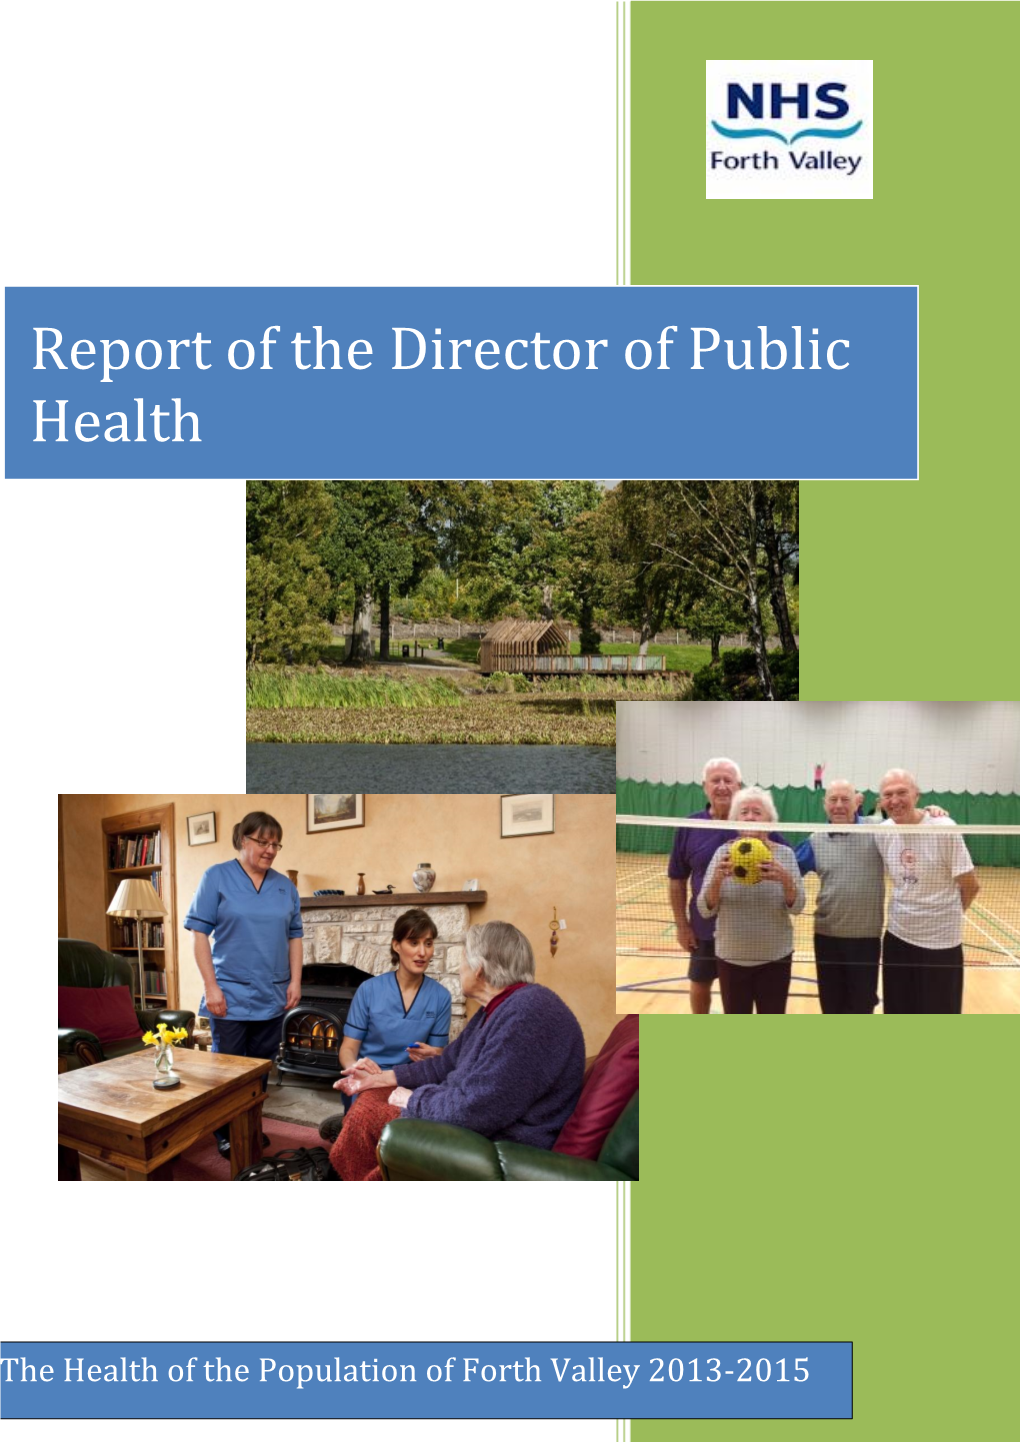 Report of the Director of Public Health